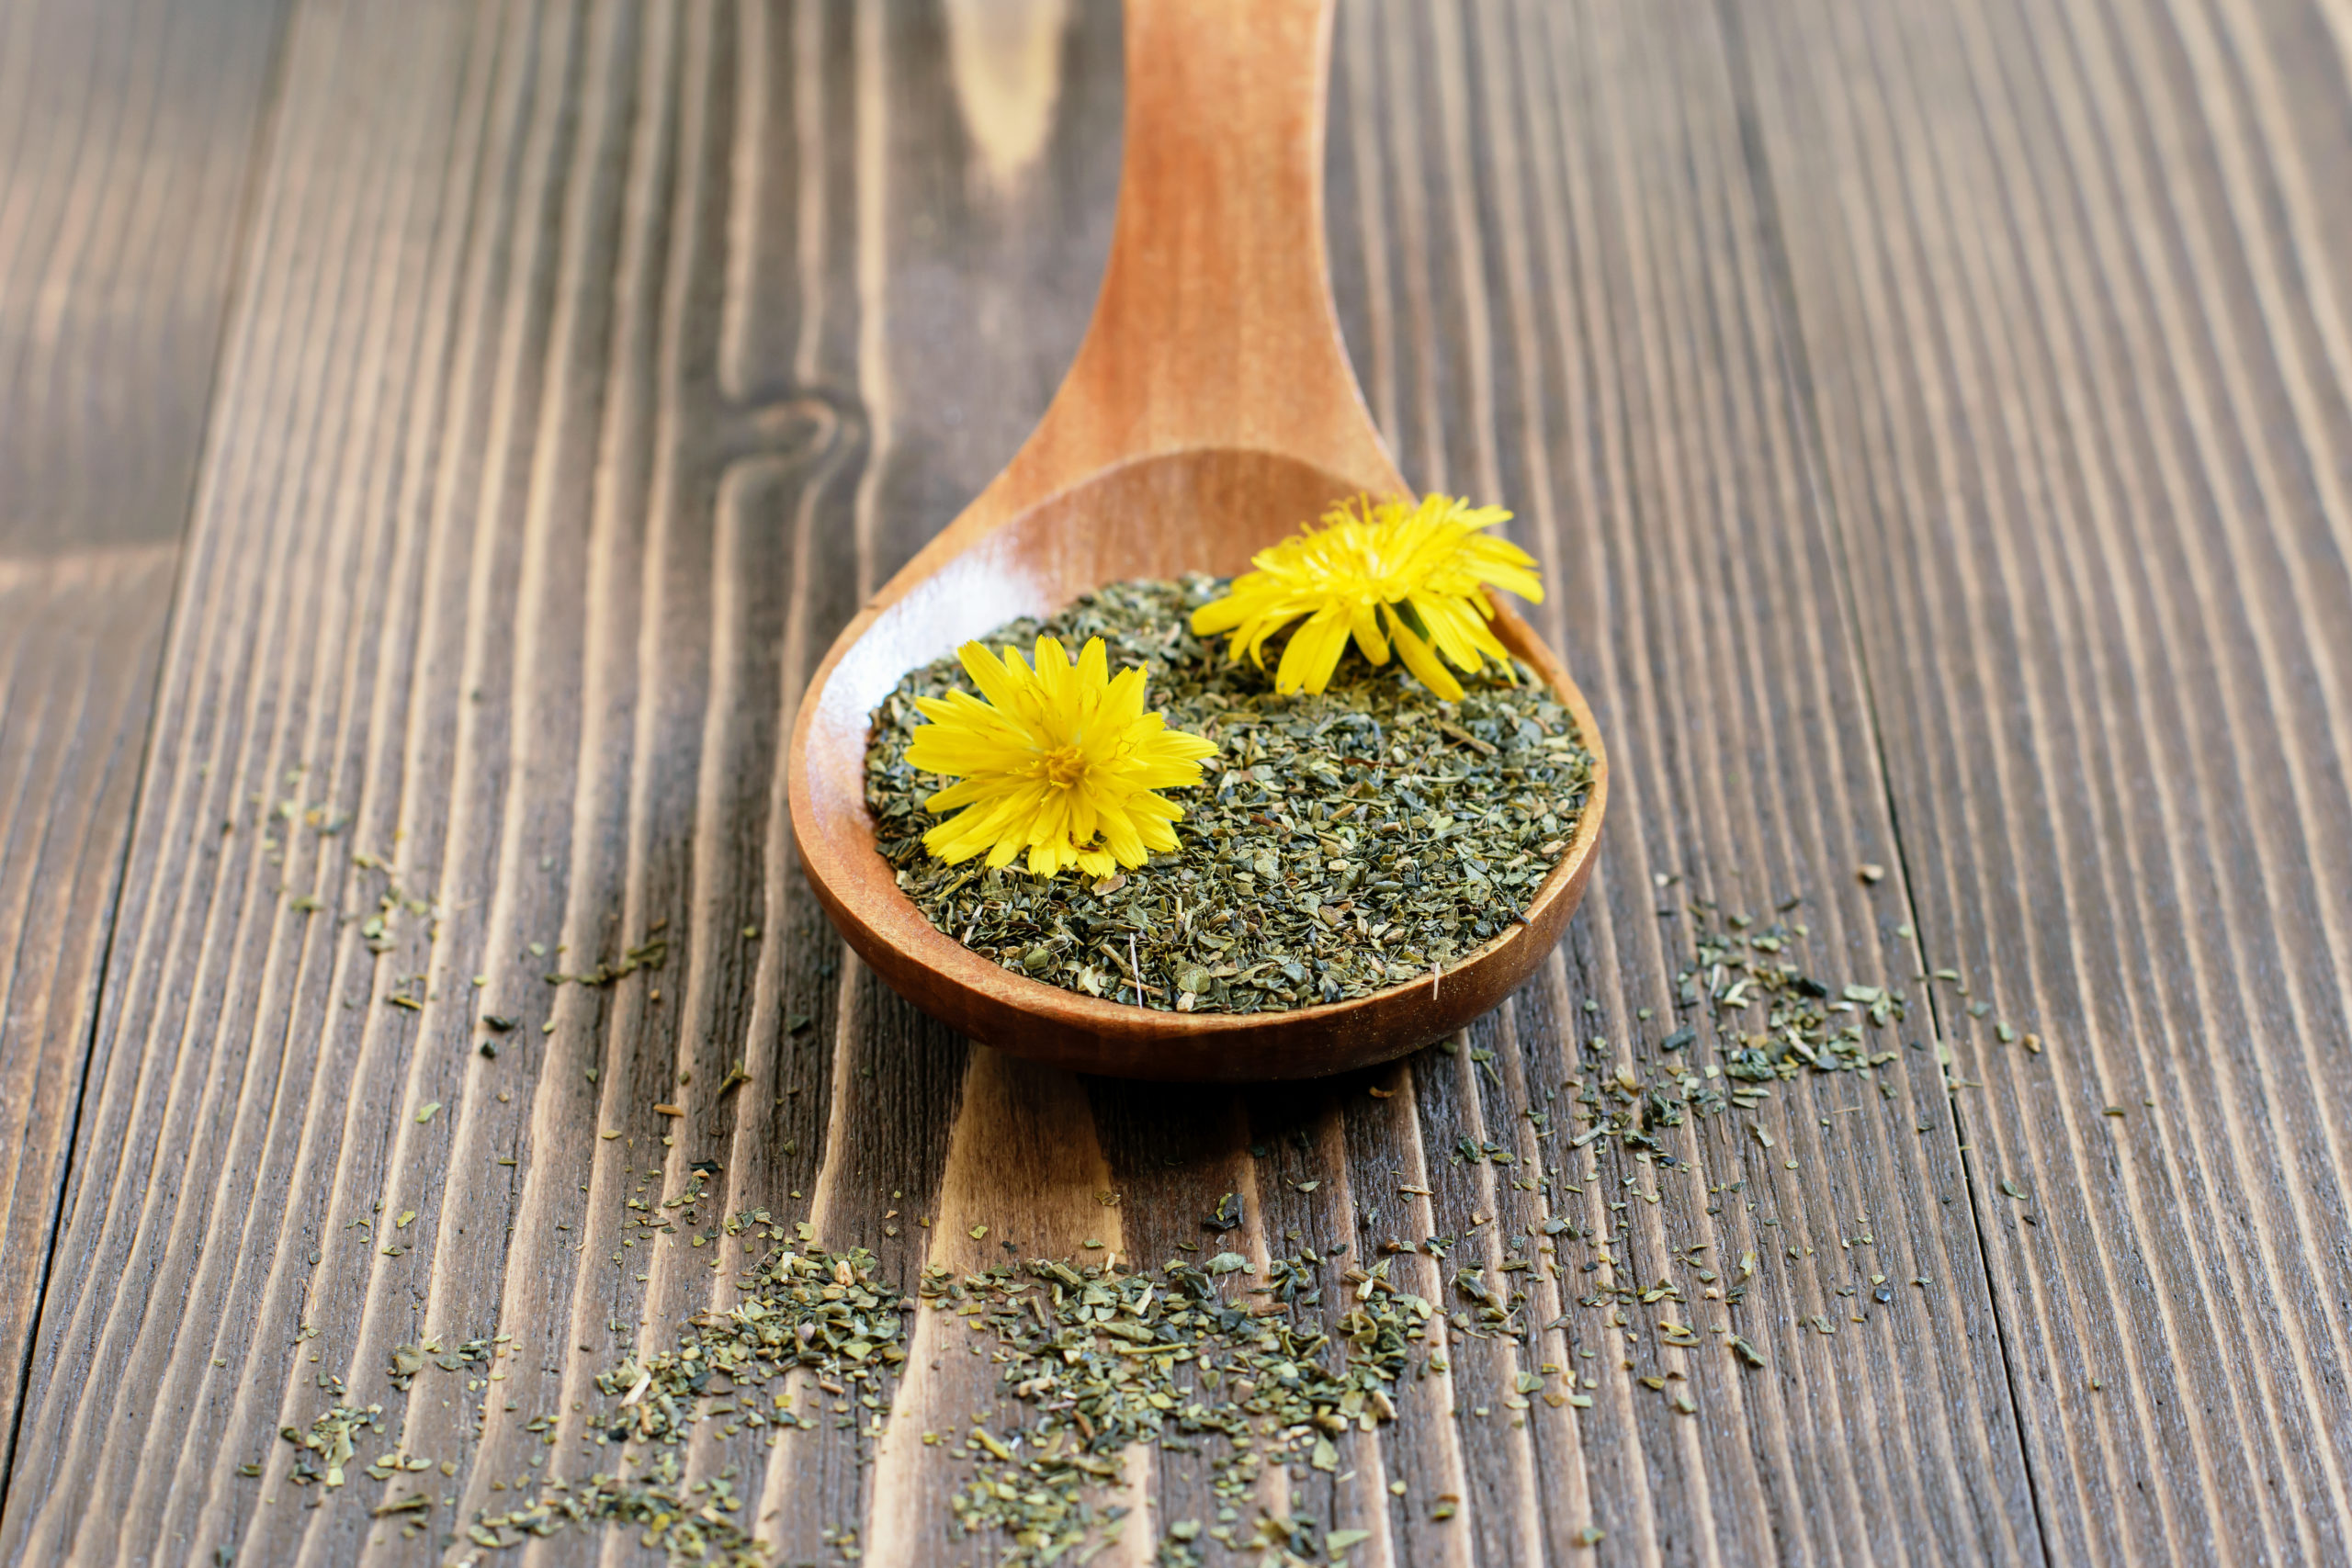 Dandelion is chock-full of health benefits that can help with a variety of different health conditions! This little plant can help promote healthy digestion, detoxification, and supports healthy liver and kidney function.